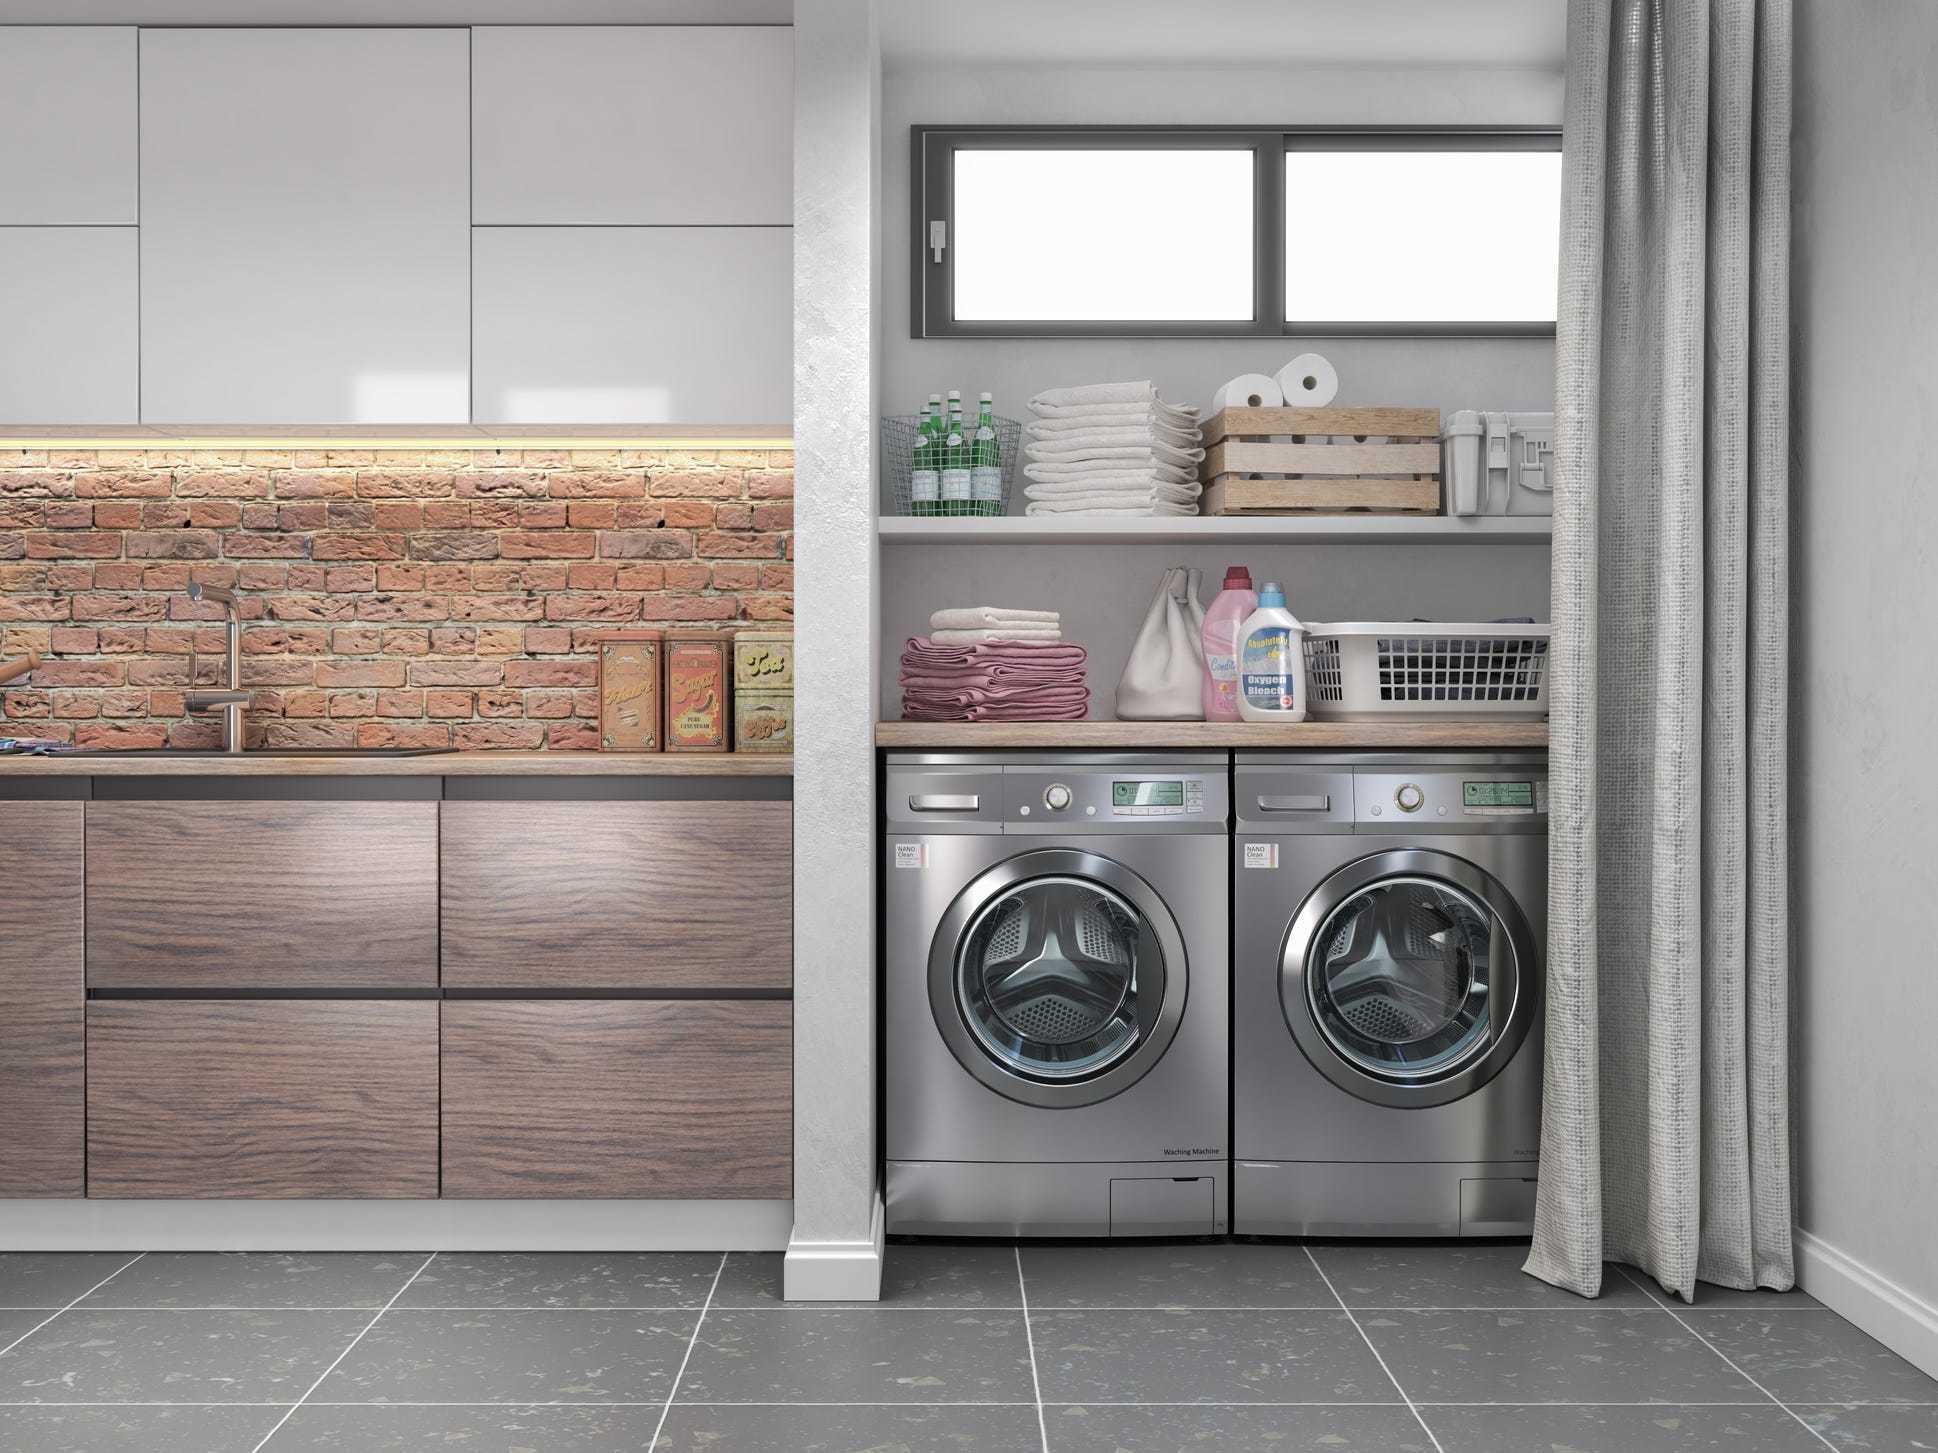 Laundry room with wood flooring and grey appliances.